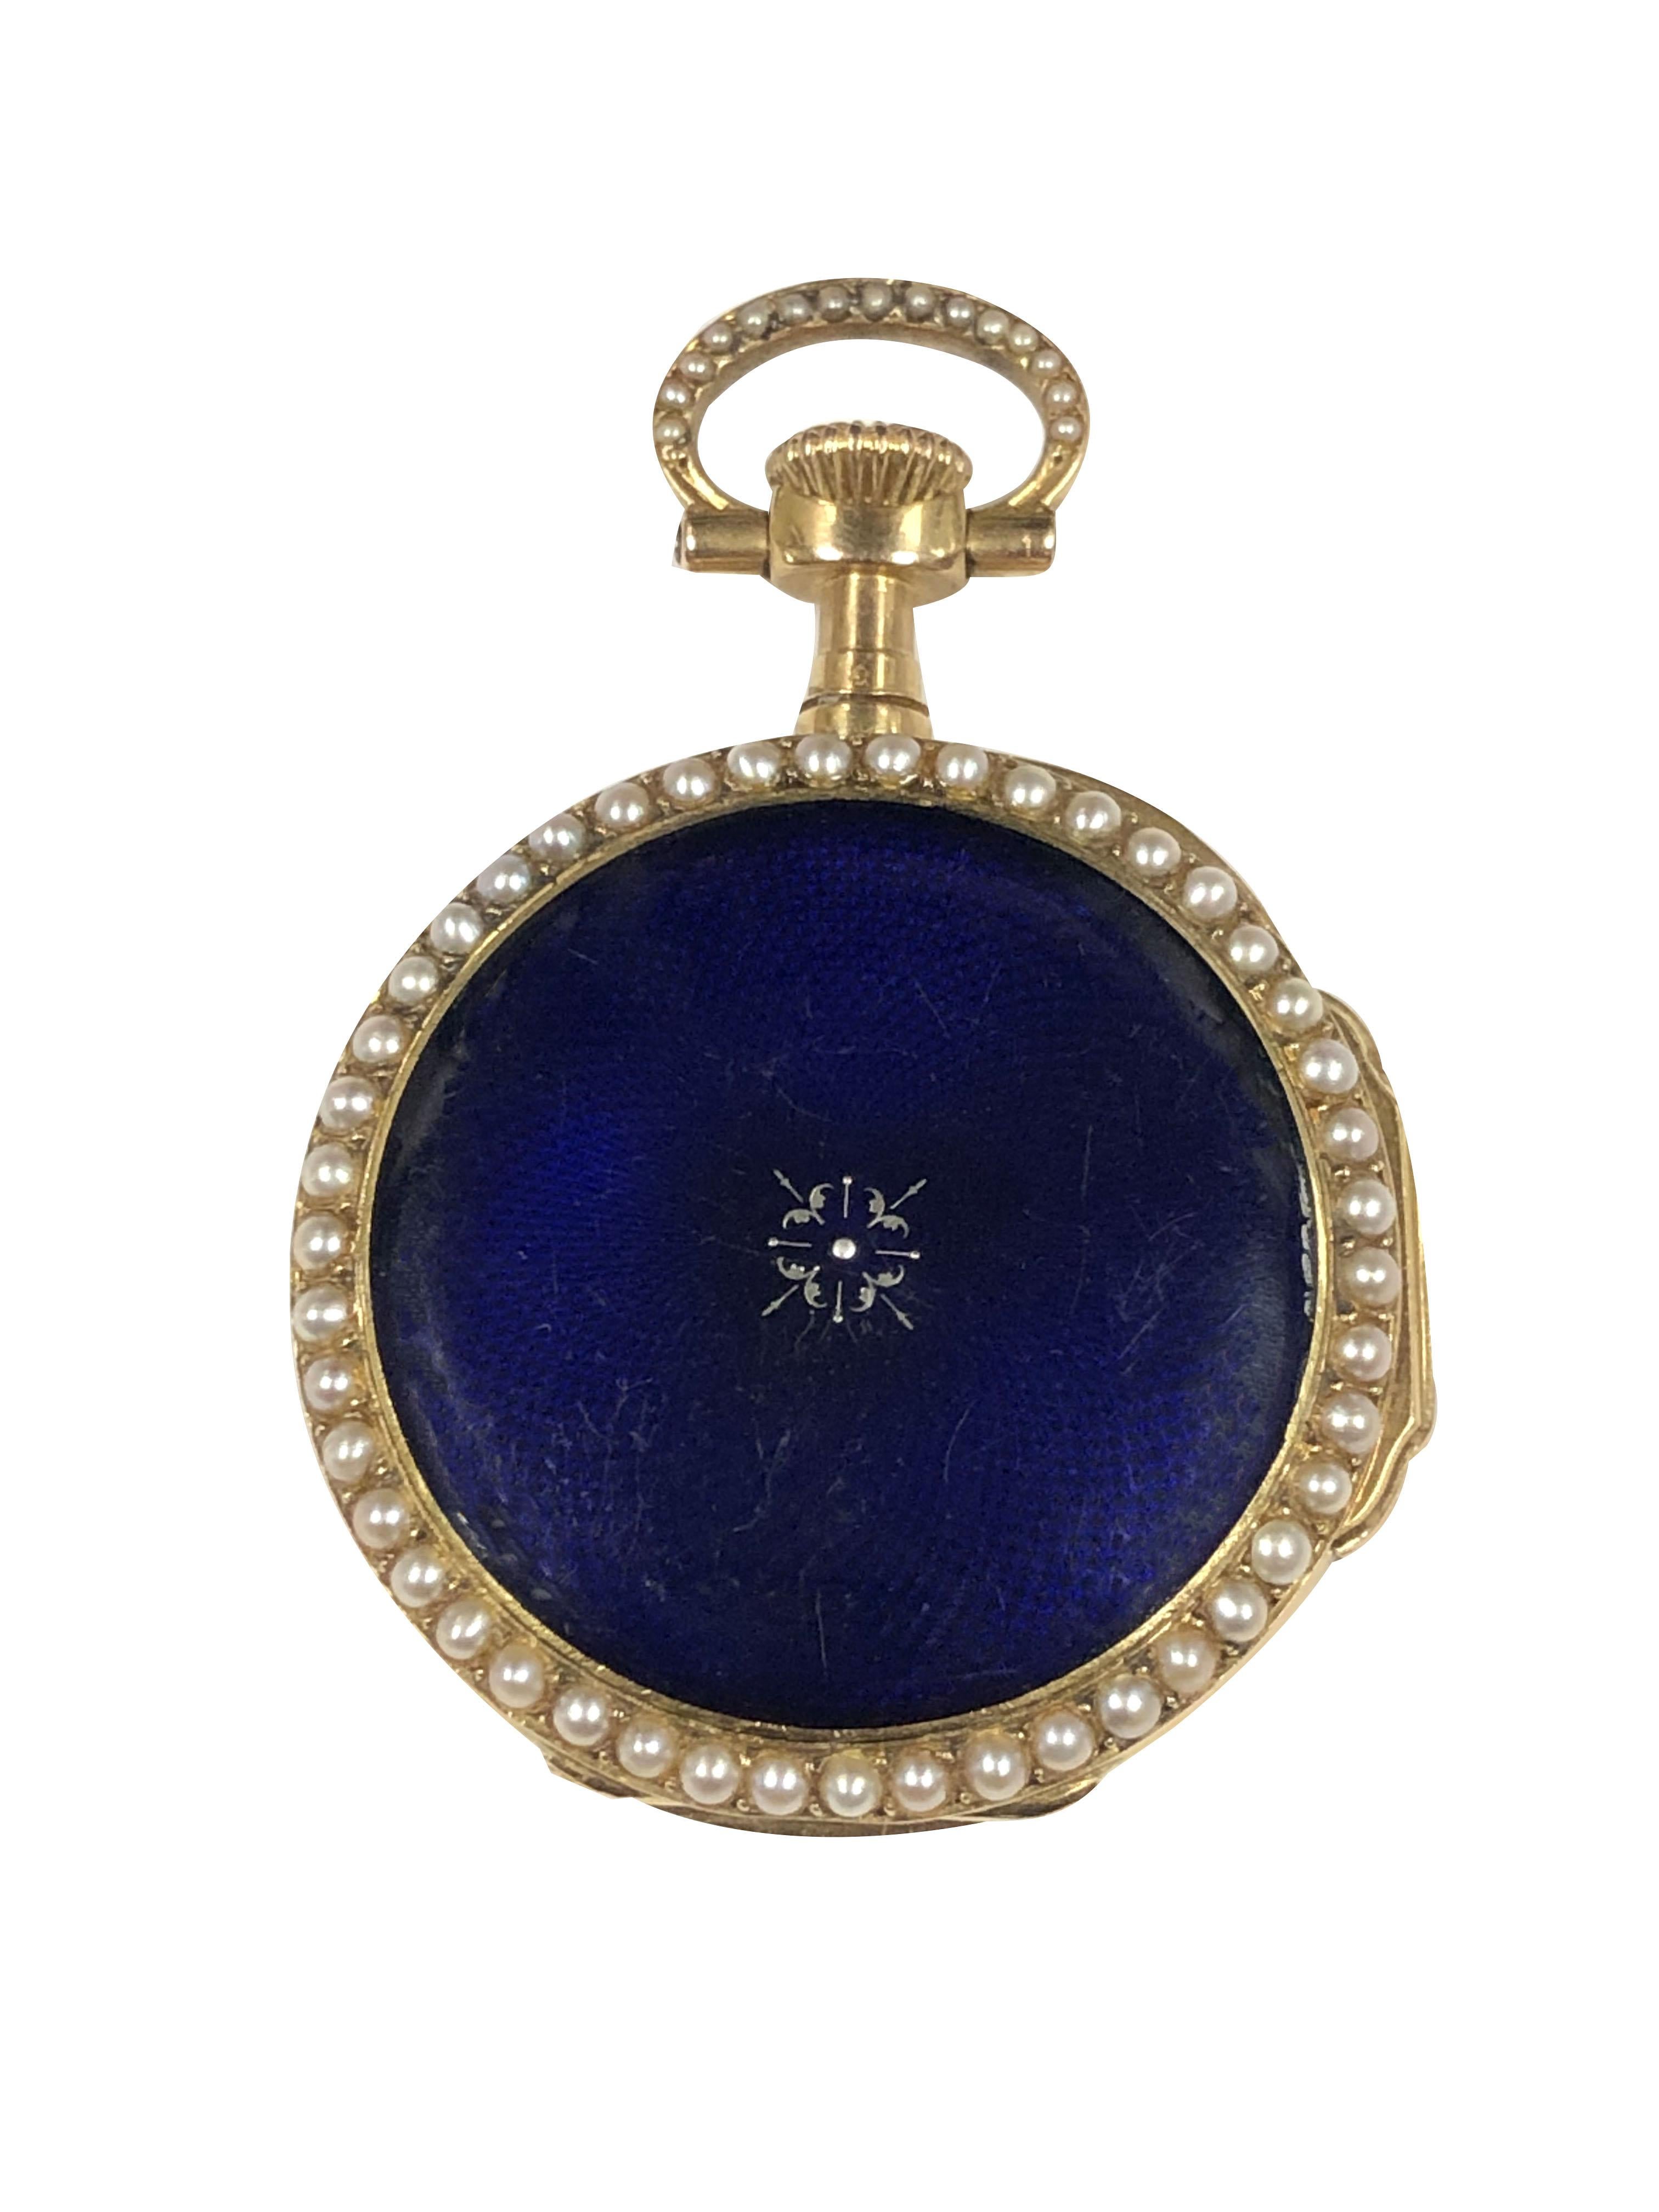 Circa 1893 Very Fine Patek Philippe Ladies Pendant Watch, 33 M.M. 18K Yellow Gold Patek Philippe signed hinged case, Gold inside Dust cover with a presentation dated 1893. Jeweled Patek Philippe signed Gilt Lever movement, Cobalt Blue Enamel Dial